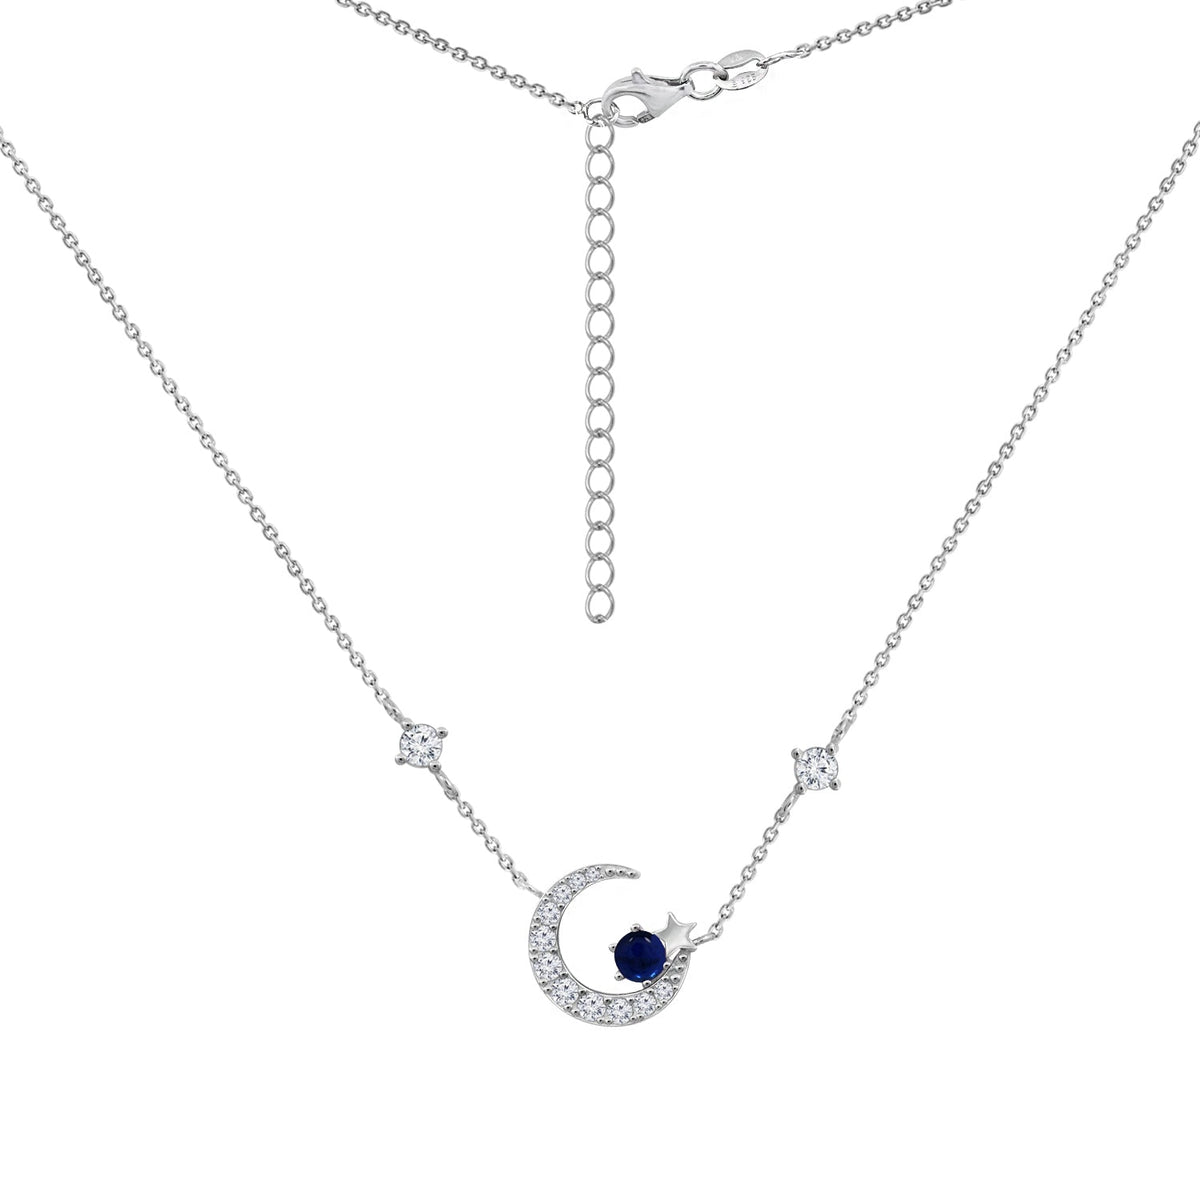 Silver Planet Neptune Necklace